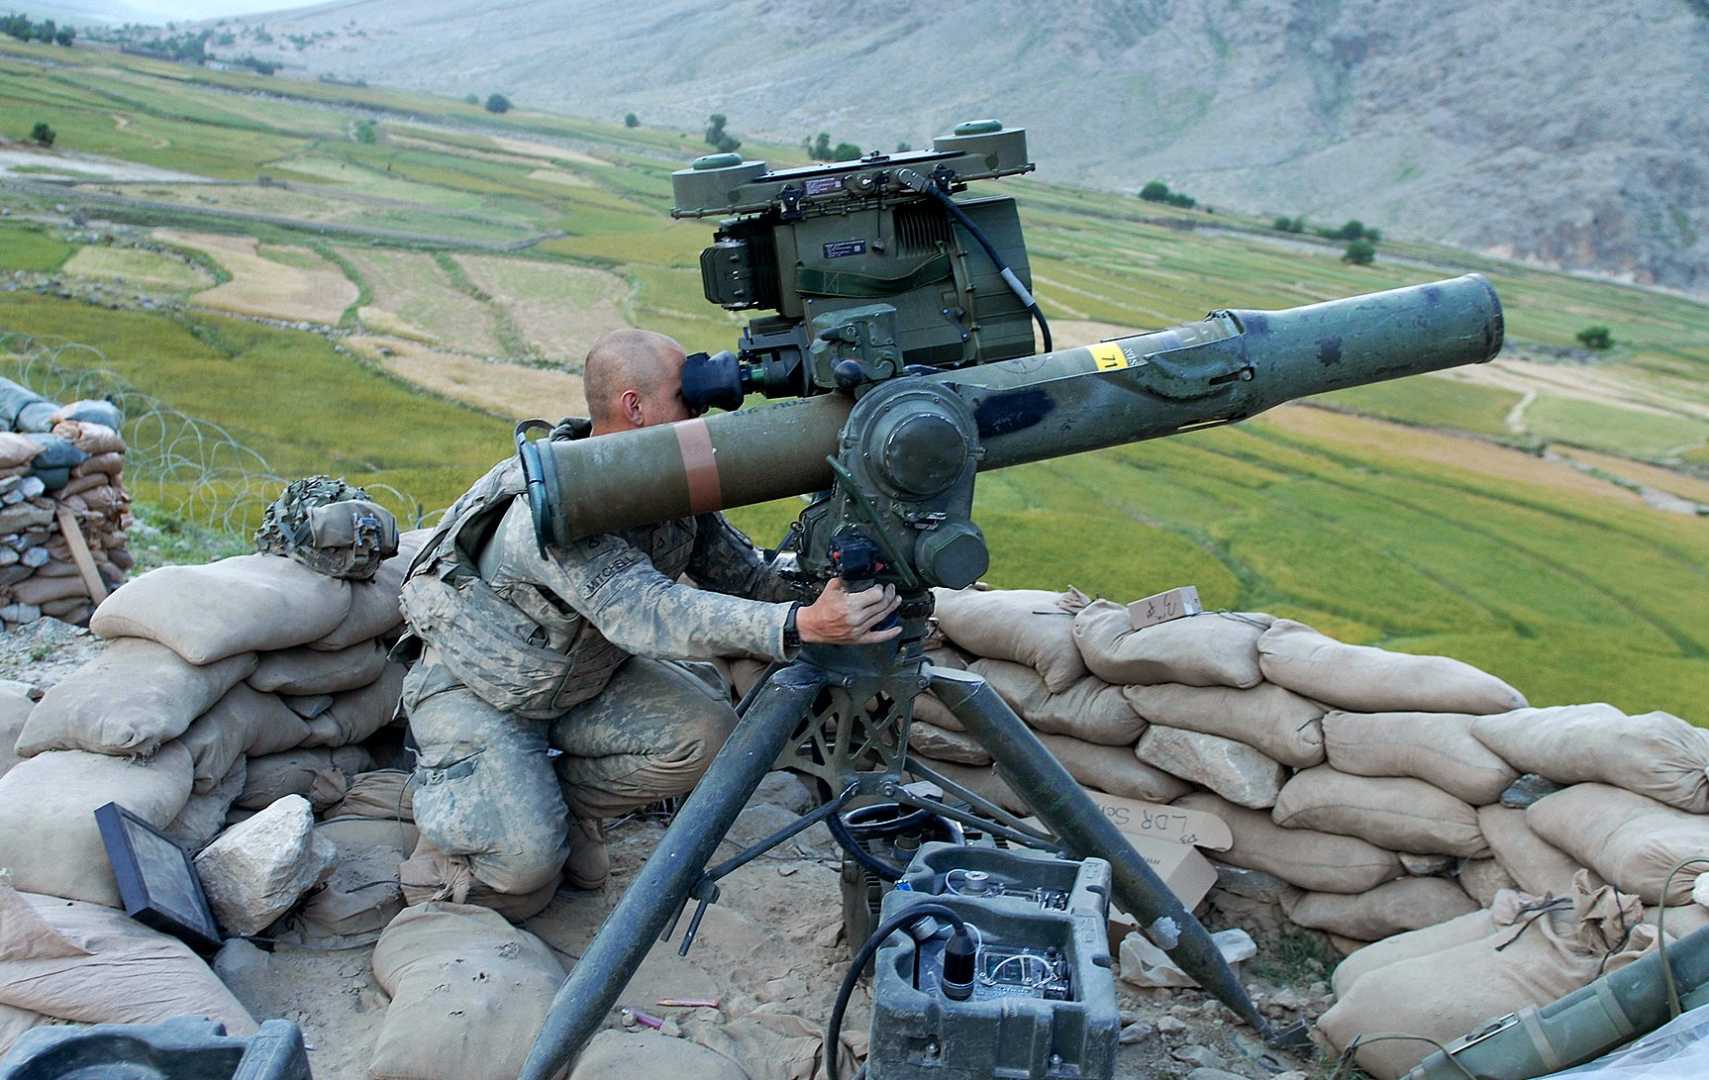 TOW is one of the most widely used anti-tank guided missiles